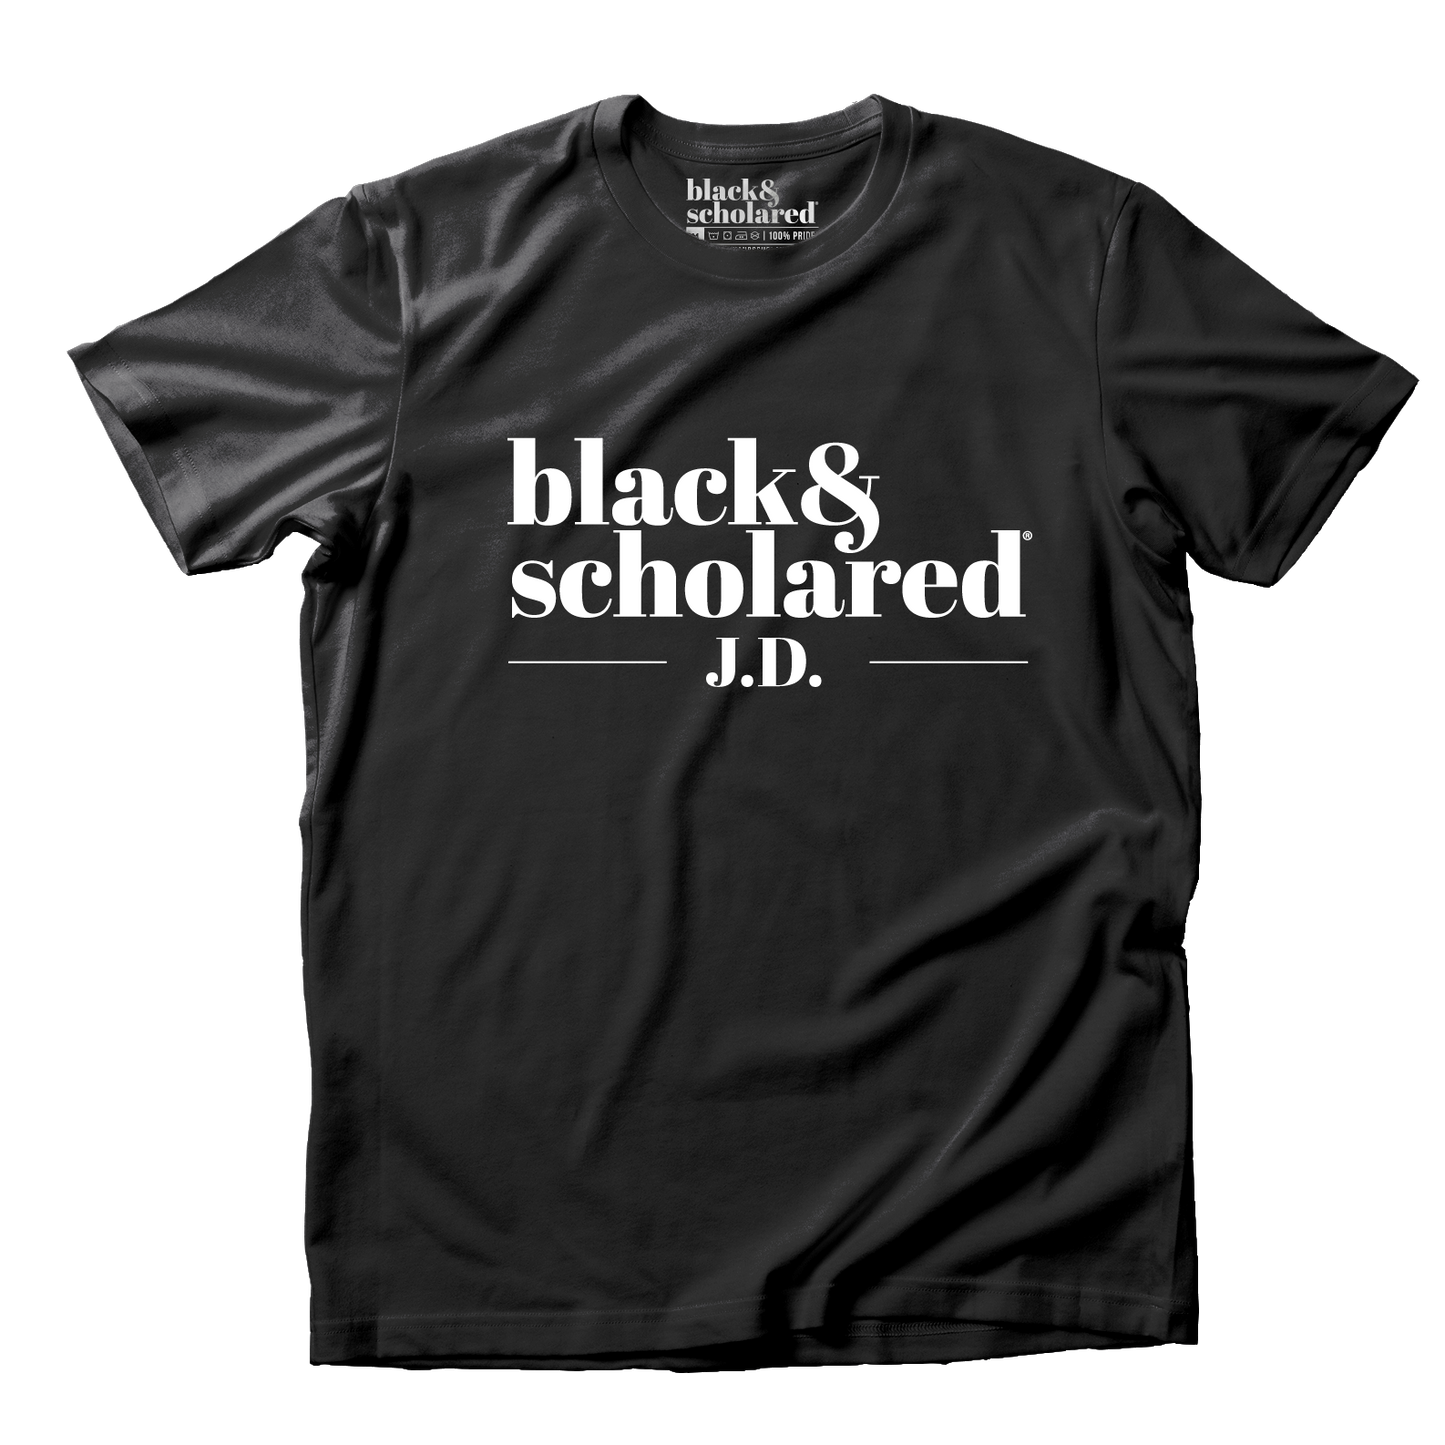 Black & Scholared® Doctorate Degree T-Shirt (PhD, MD, JD)